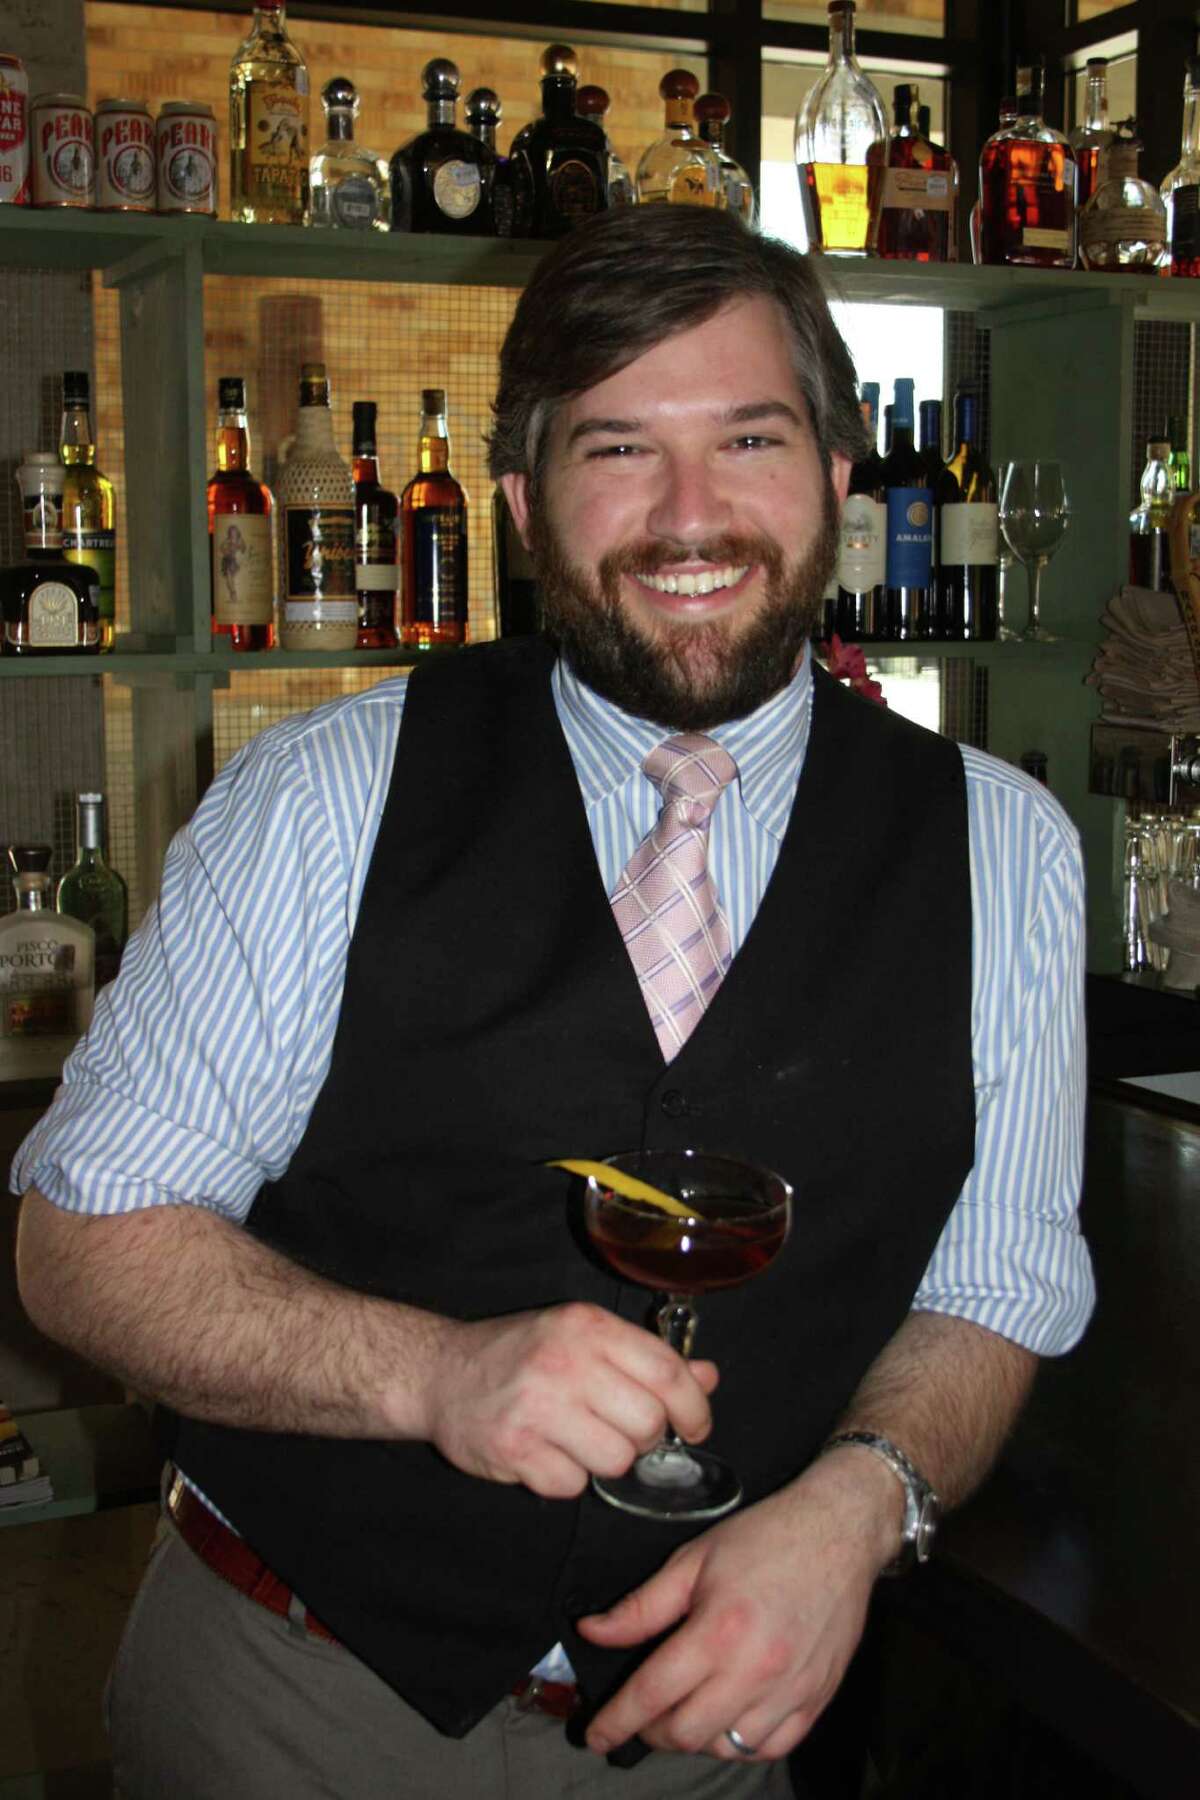 Chris Ware is the bar manager at Arcade Midtown Kitchen.